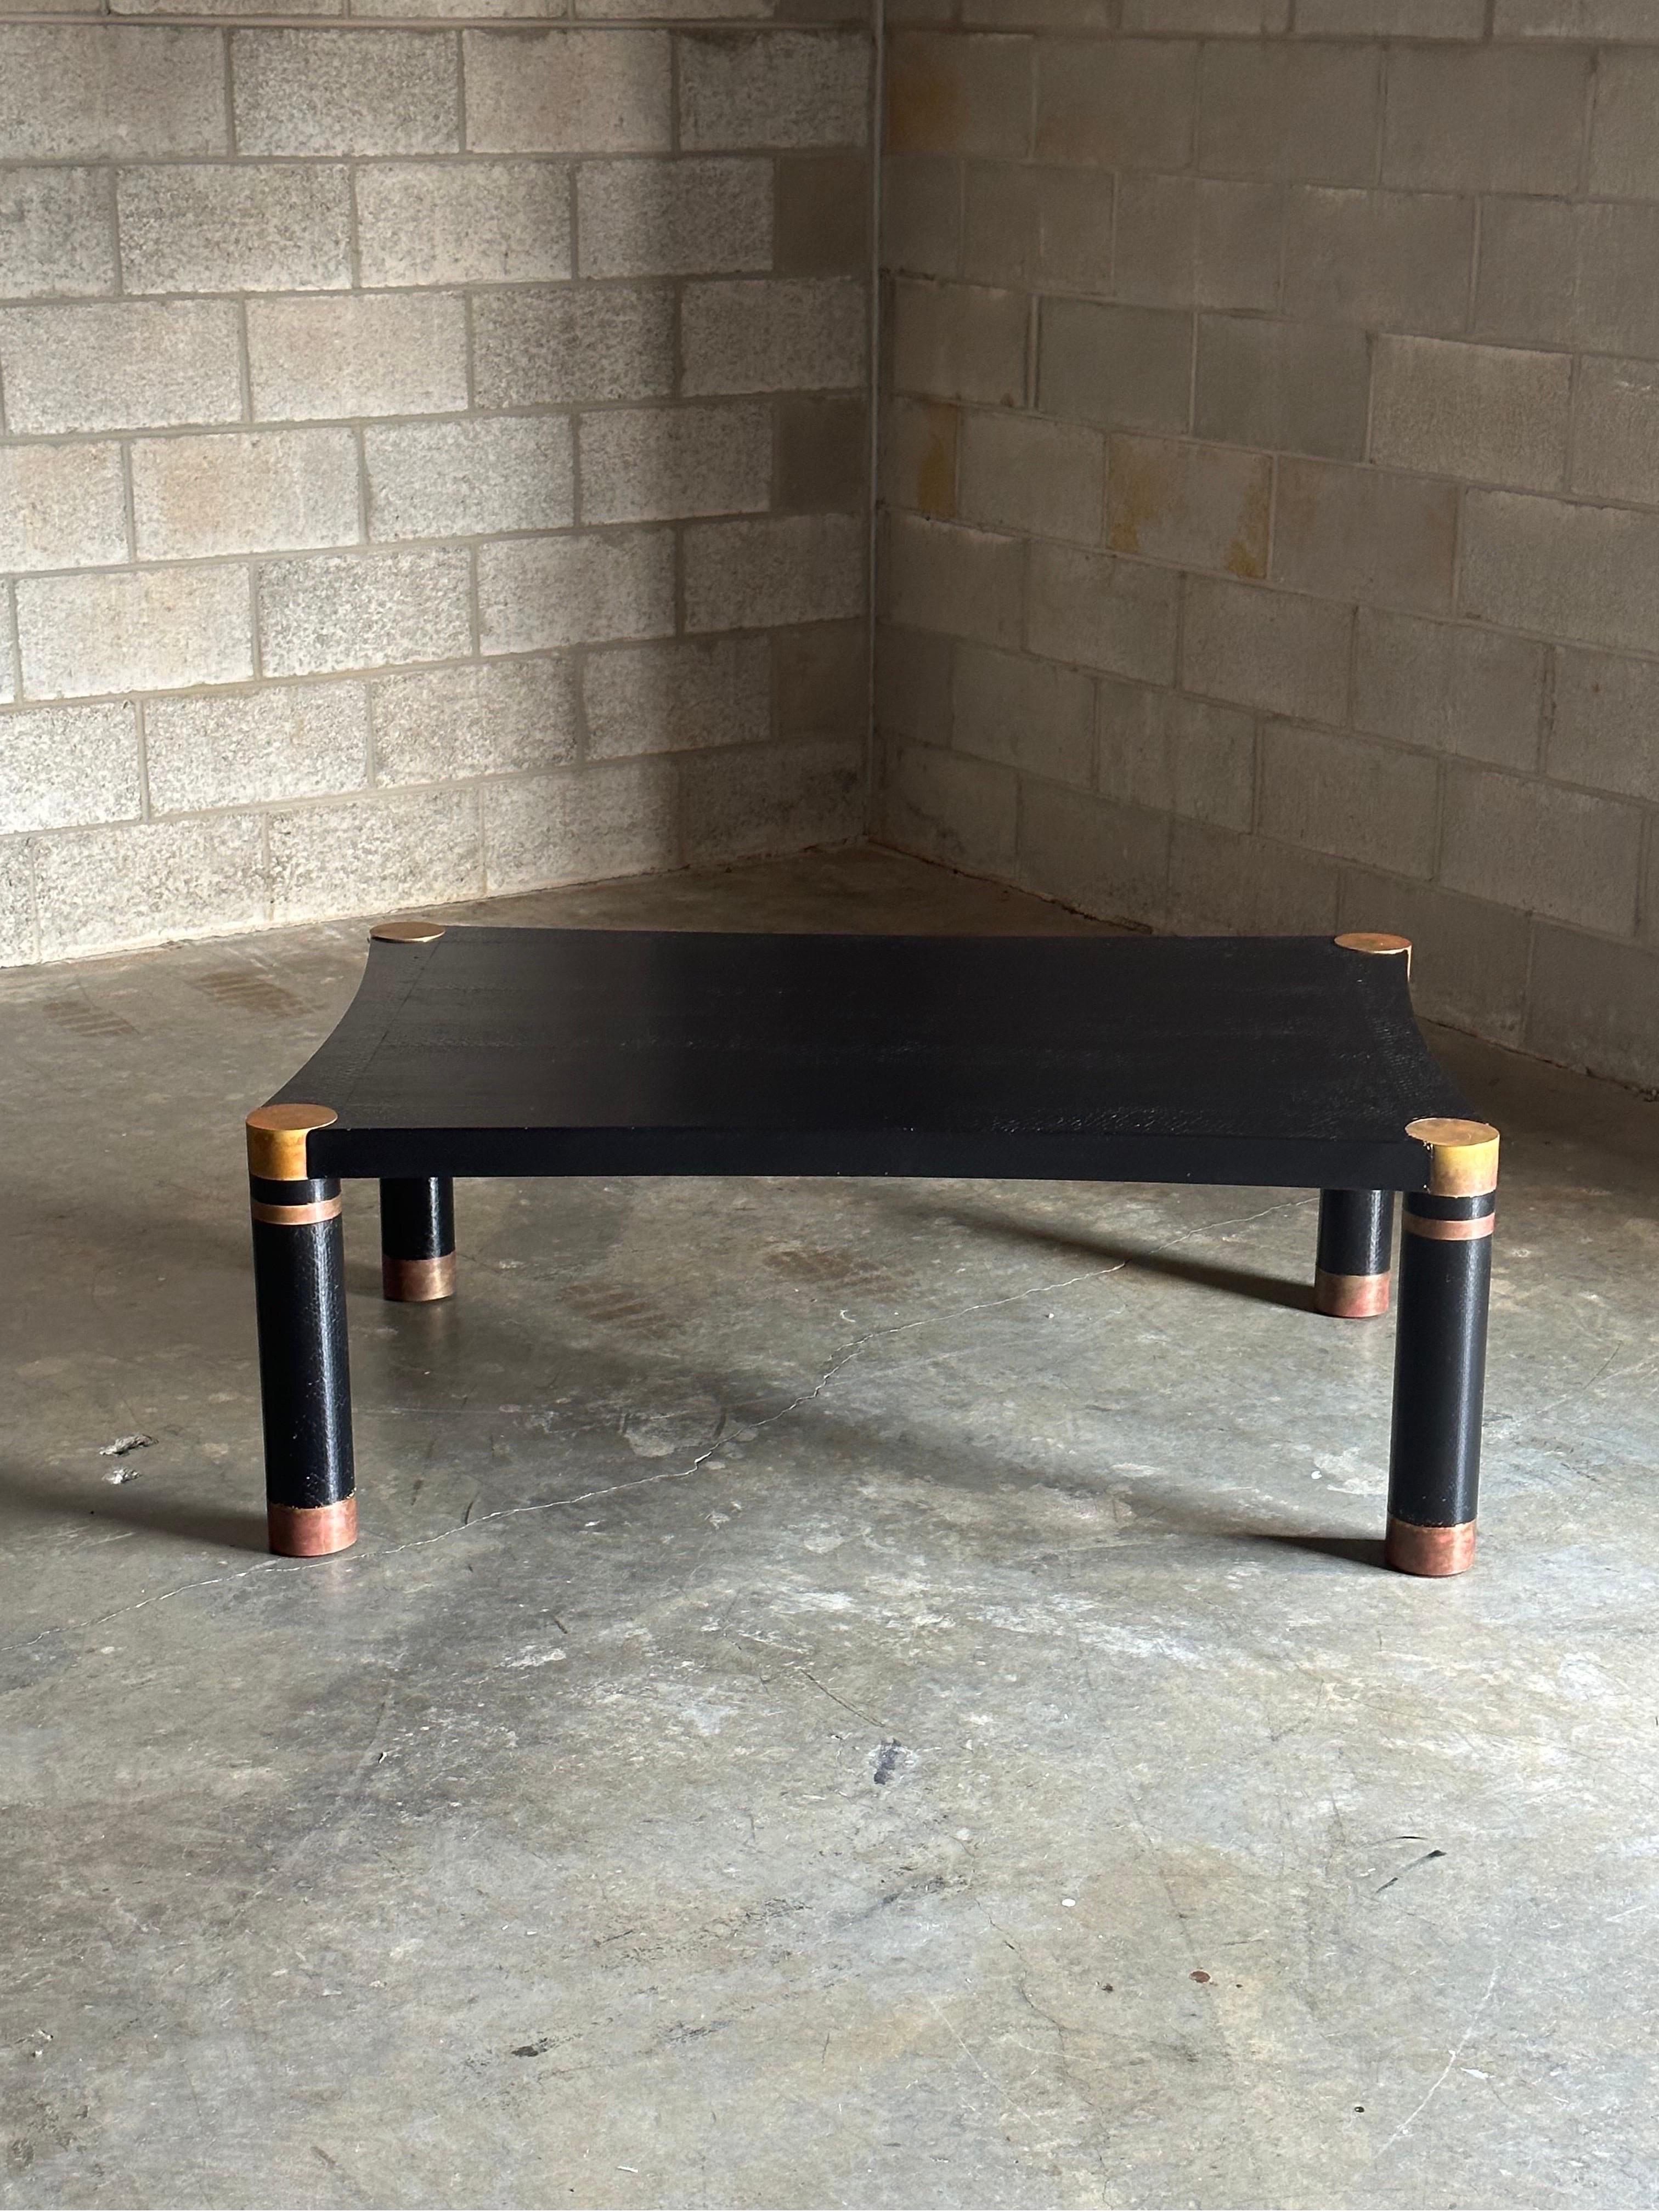 Karl Springer coffee table in what appears to be sea snake leather with Patinated brass accents. Lovely simplistic form with nods of elegance through the reversed arched sides. Brass details show fantastic patina. A wonderful example from one of the